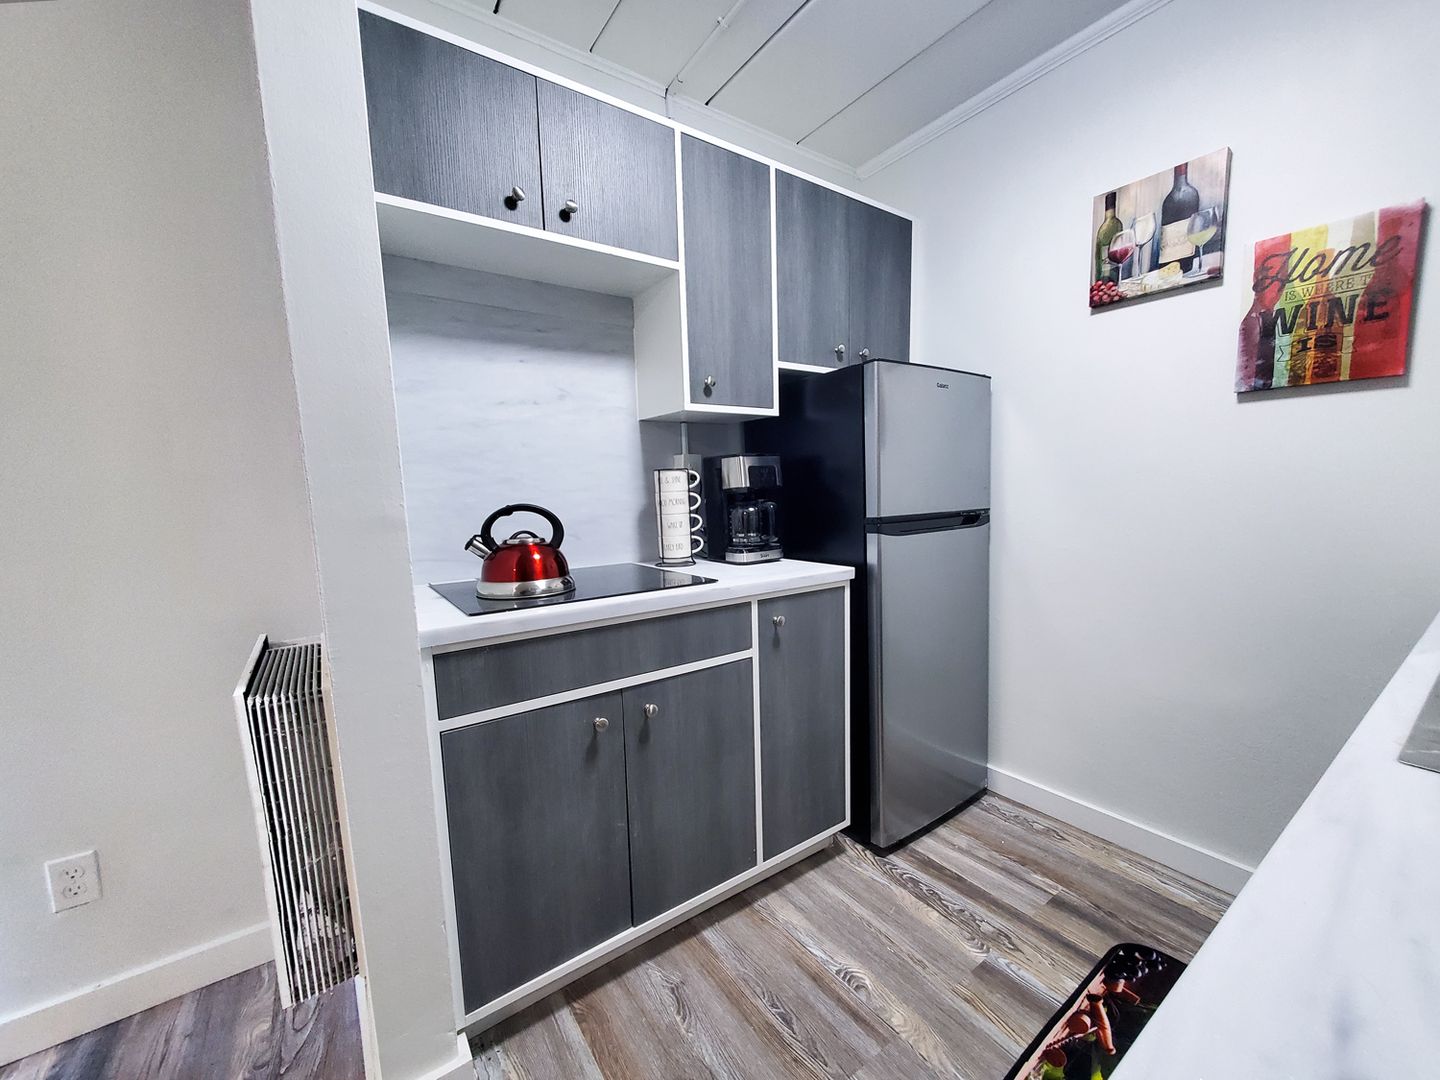 2 Bed and 1 Bath Apartments for Rent in Cleveland | Newly Renovated! Image